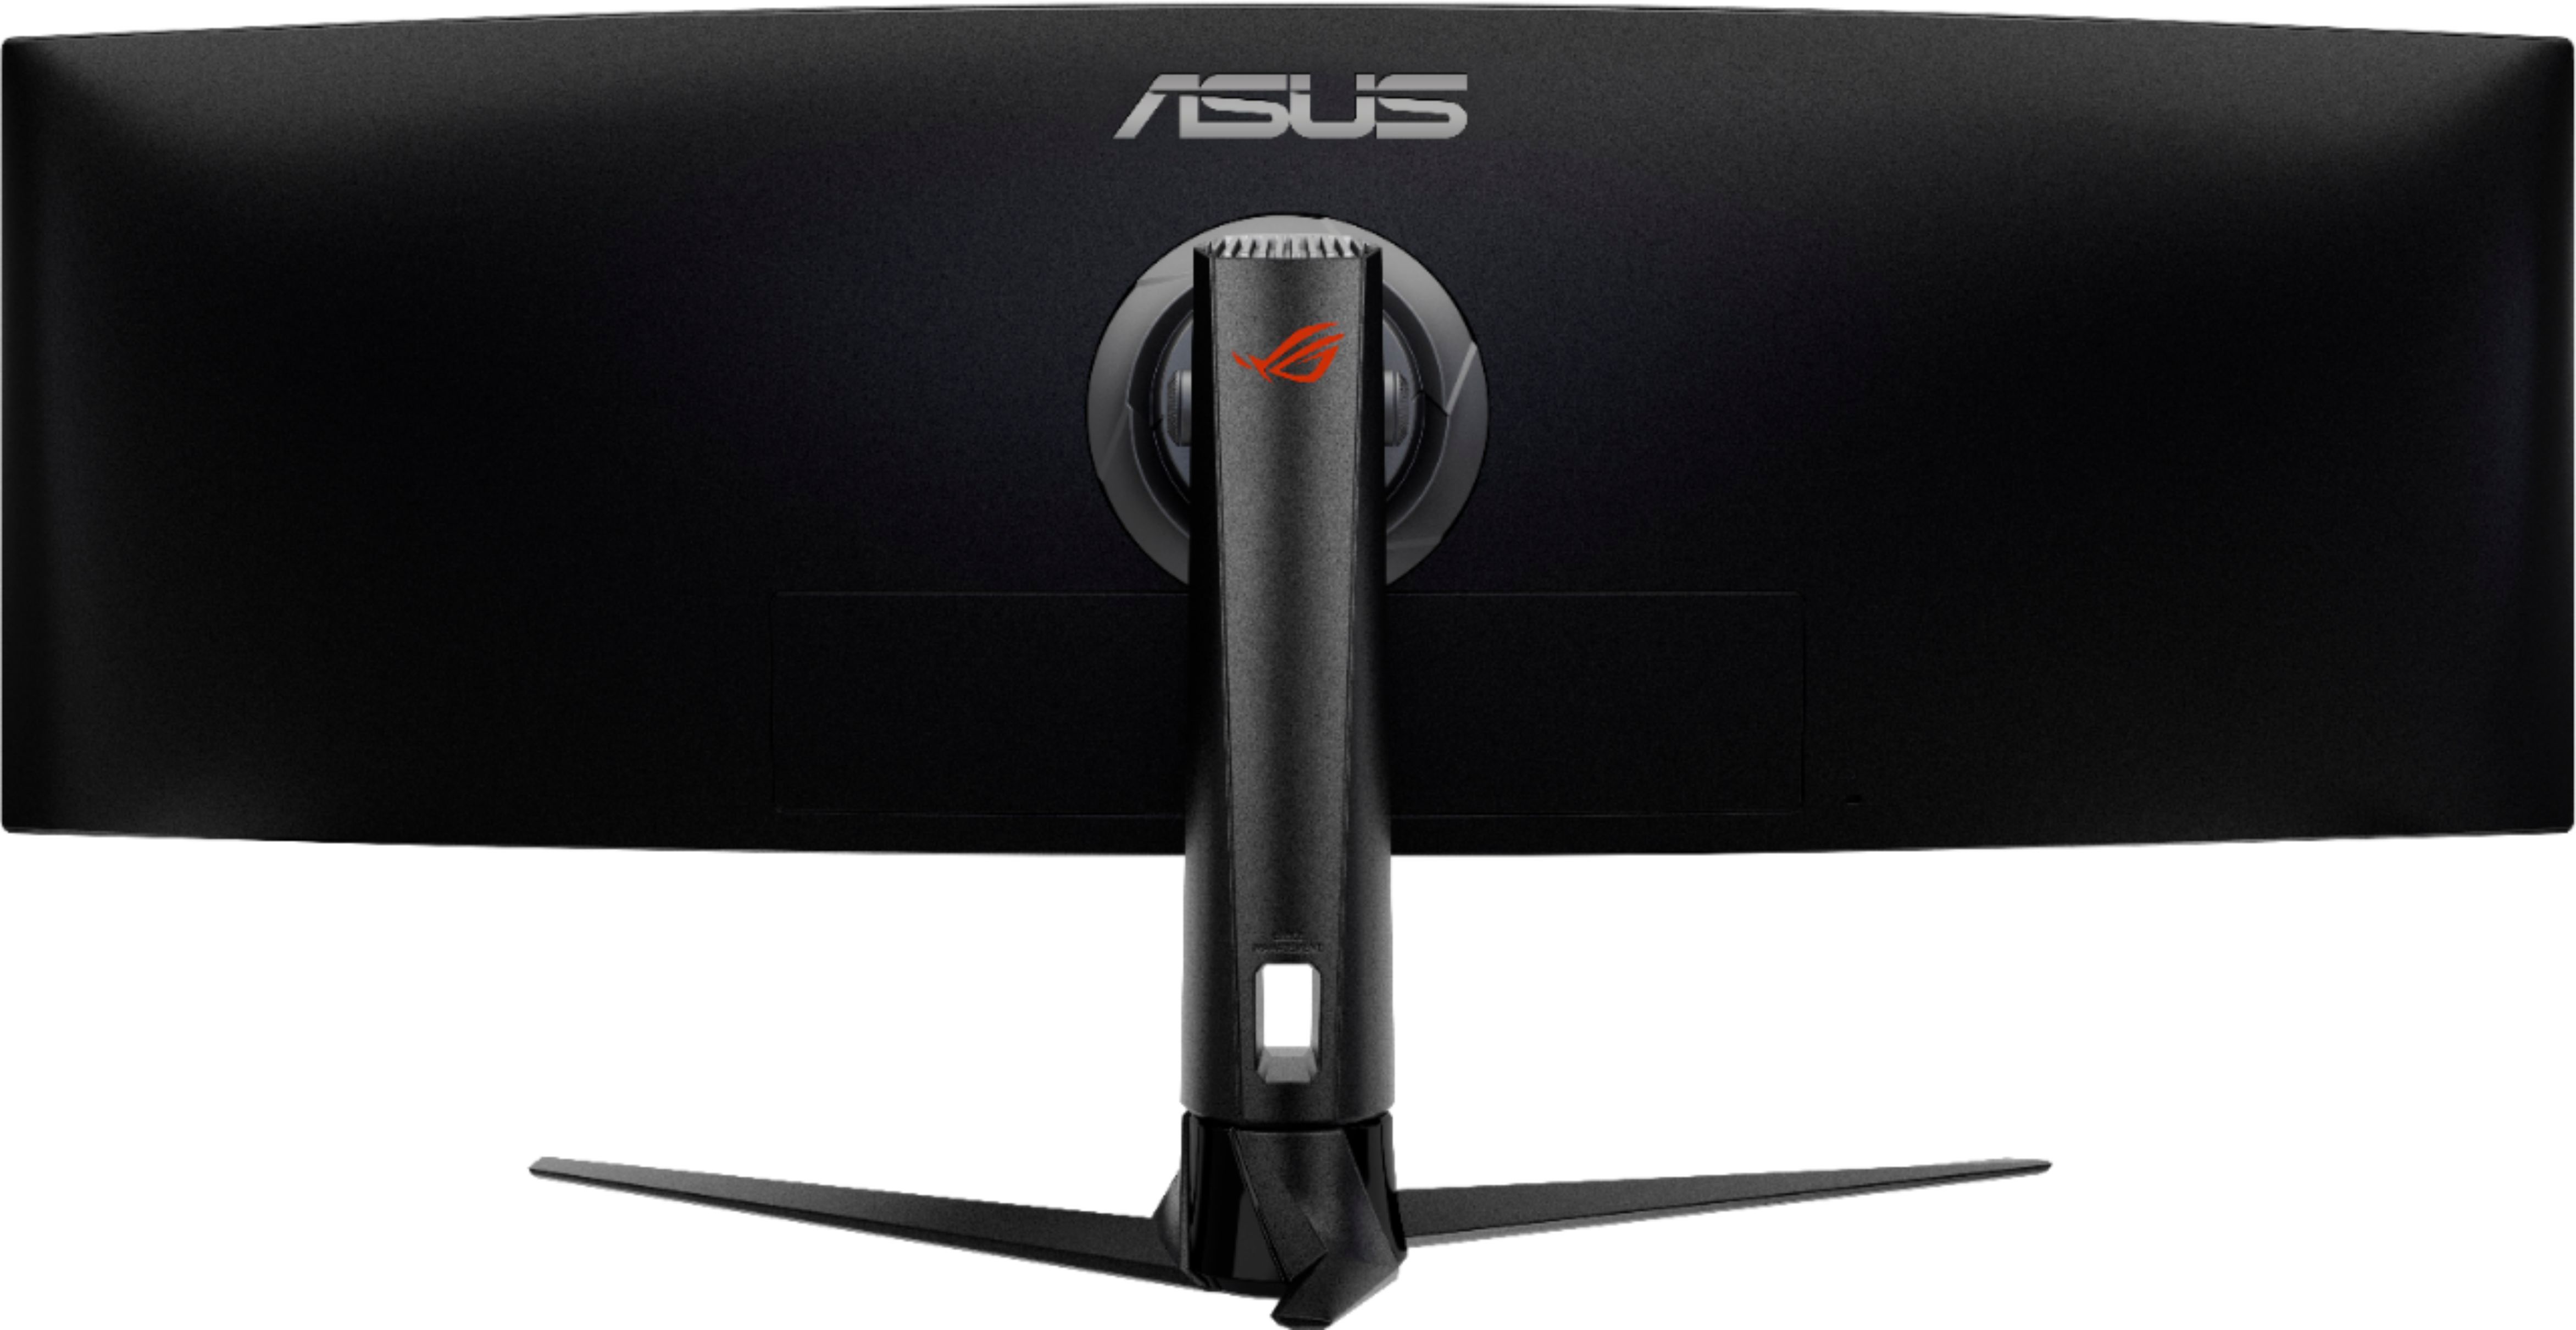 Back View: ASUS - ROG Strix 49” Curved FHD 144Hz FreeSync Gaming Monitor with HDR (DisplayPort,HDMI,USB) - Black